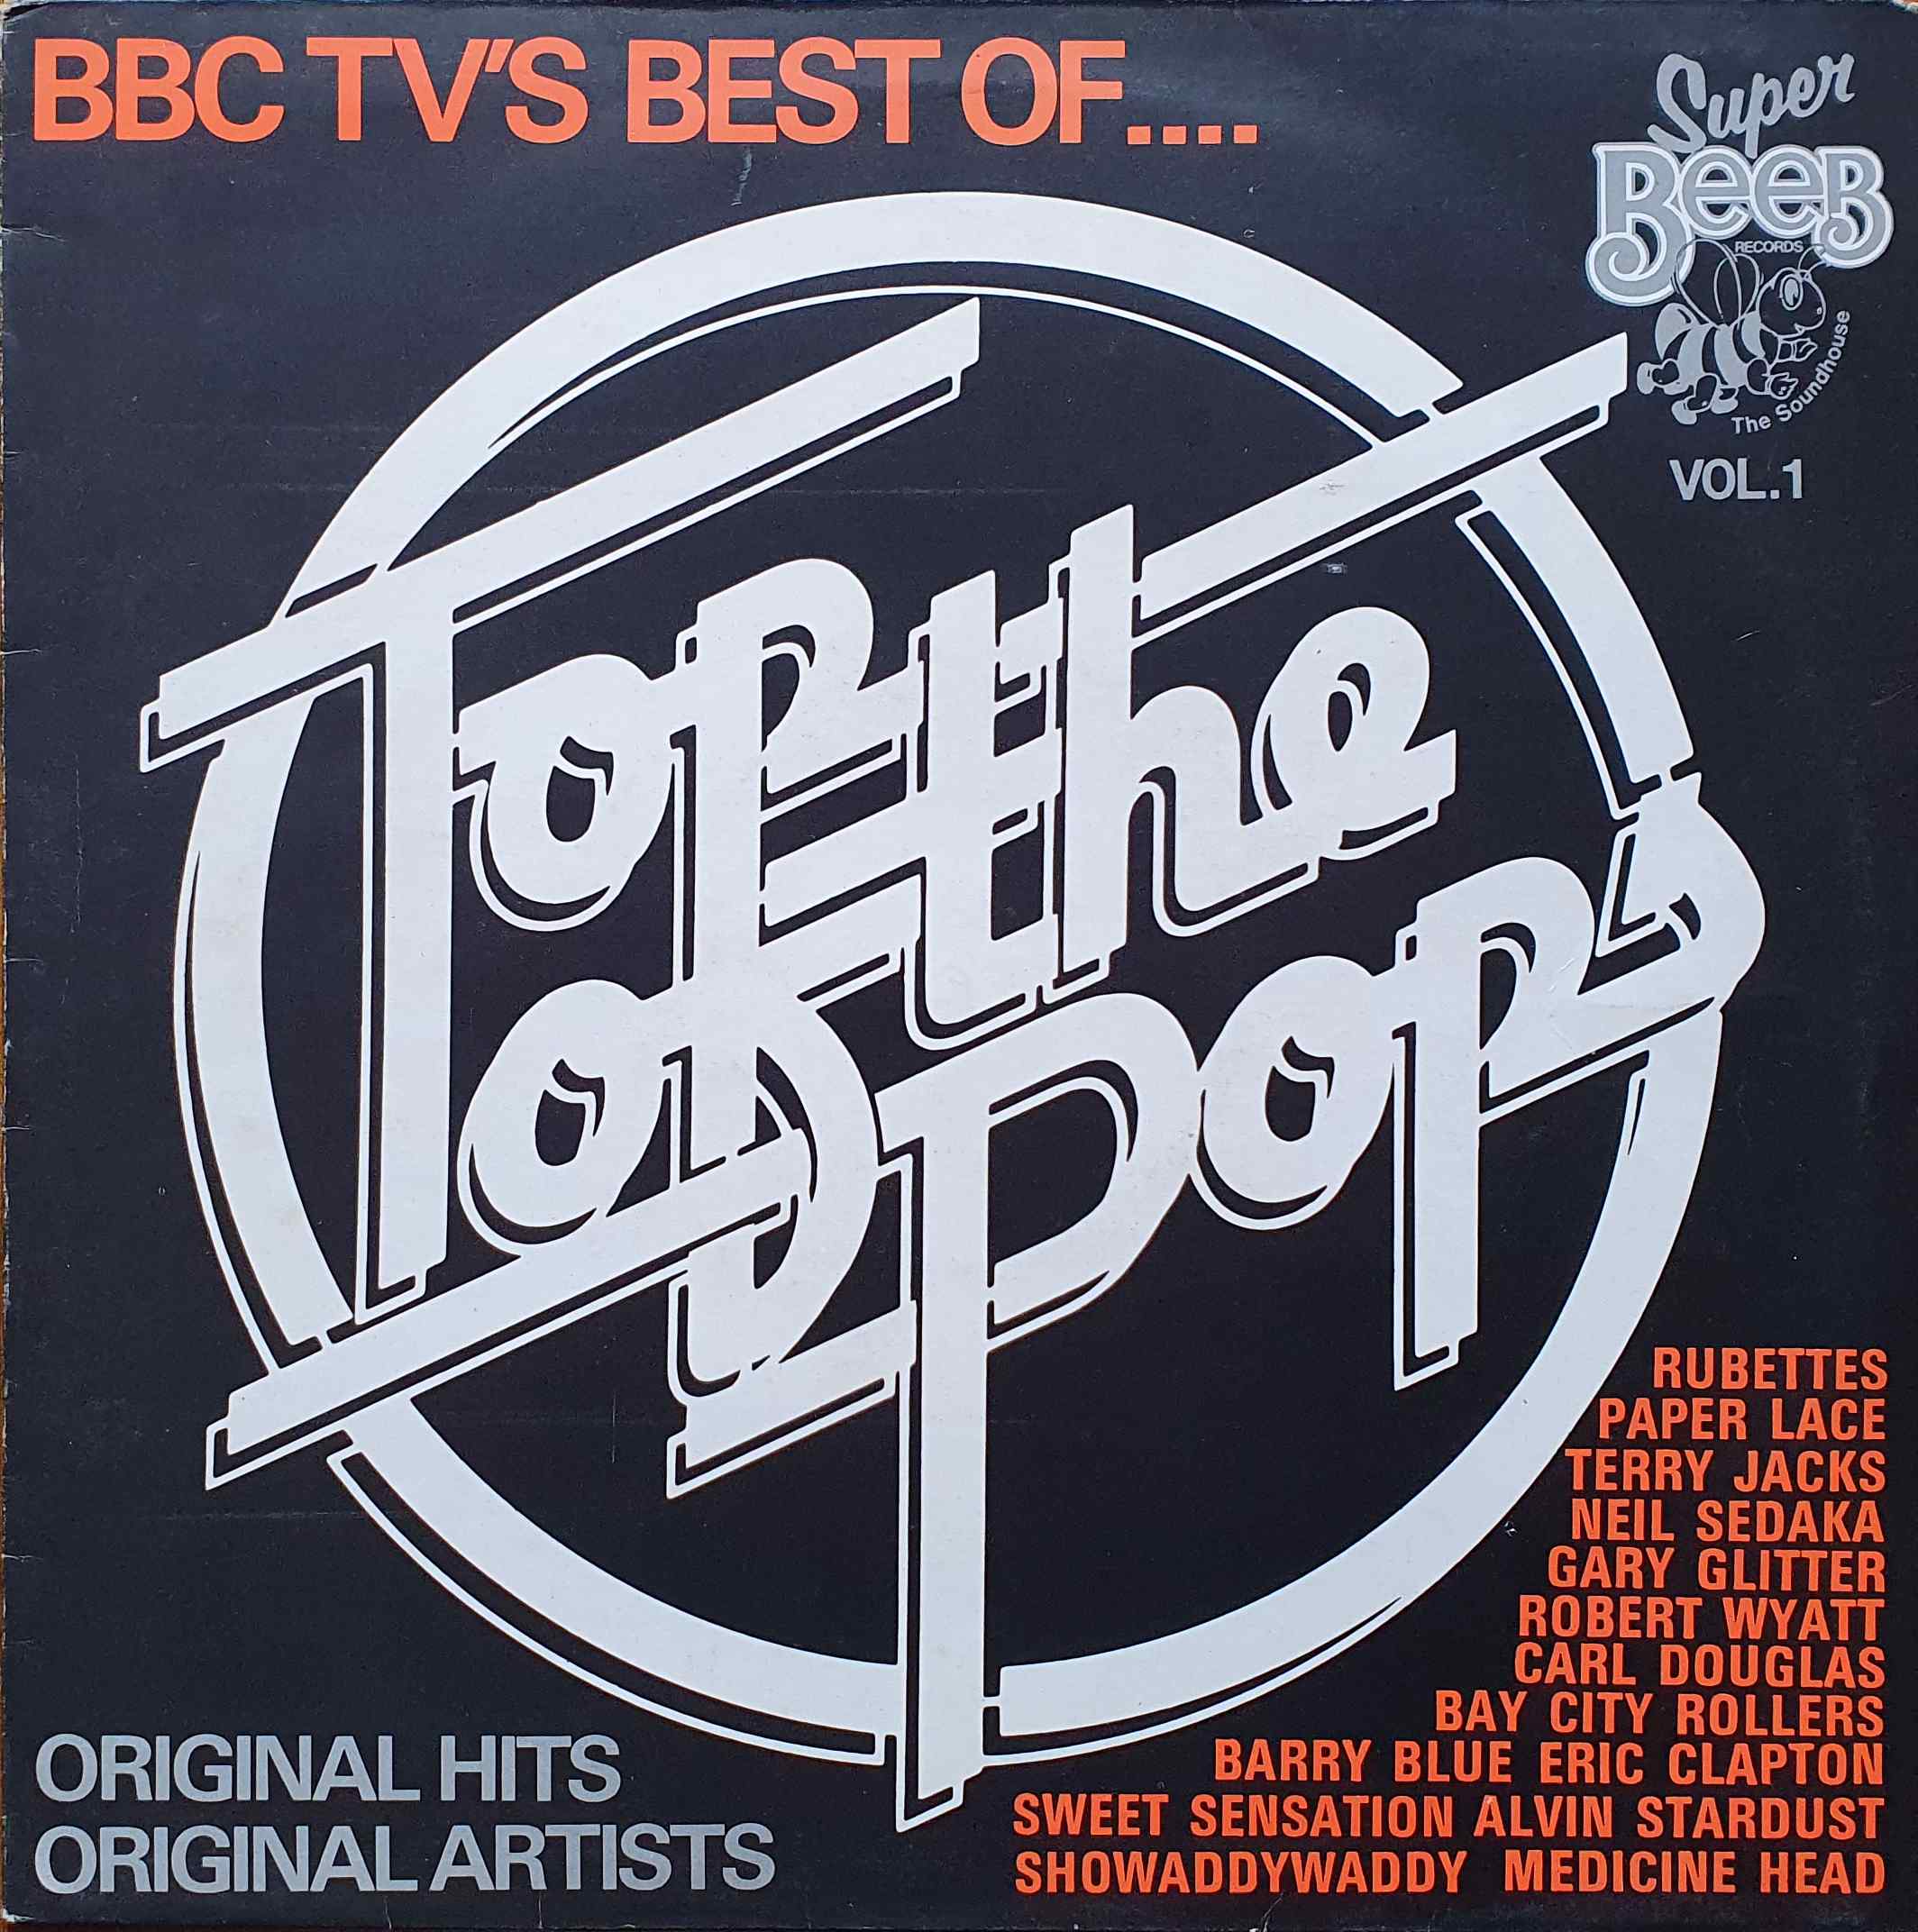 Picture of Best of top of the pops by artist Various from the BBC albums - Records and Tapes library